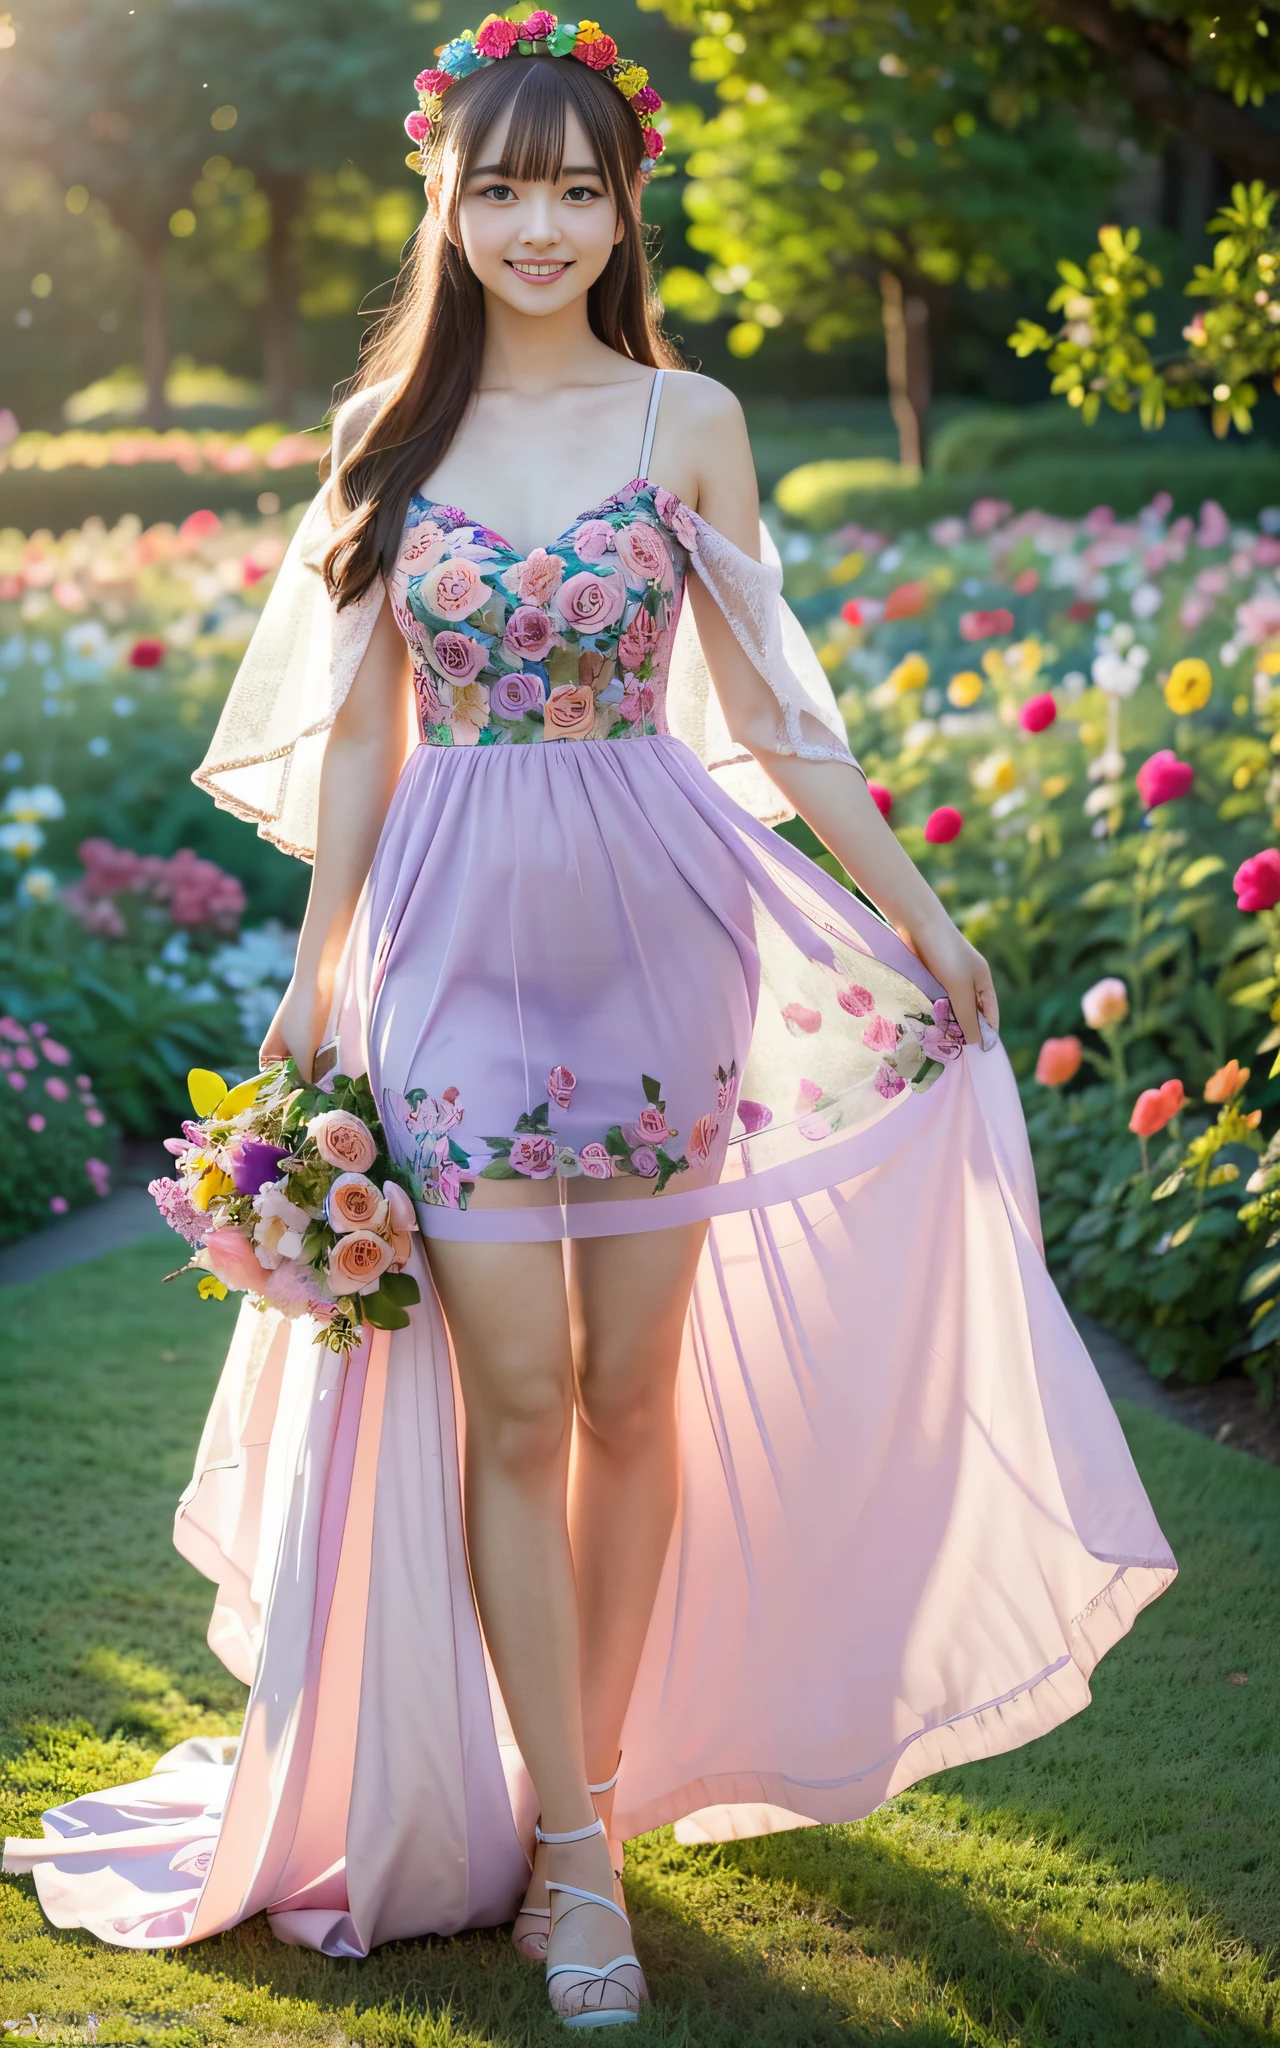 Full body photo,((Slim body)))),20 years old, Twilight rays, sheer summer dress, flower crown, ((Tokugawaen)), rose front bokeh, bokeh, photorealistic, surrounded by colorful roses,((((smiling)))),(1 girl), (sunset:1.3), (8k, raw photography, best quality, masterpiece:1.2), (realistic, photorealistic:1.37), Best Quality, Ultra High Definition, (Standing in the Flower Garden:1.3), (Vibrant and Colorful:1.3)